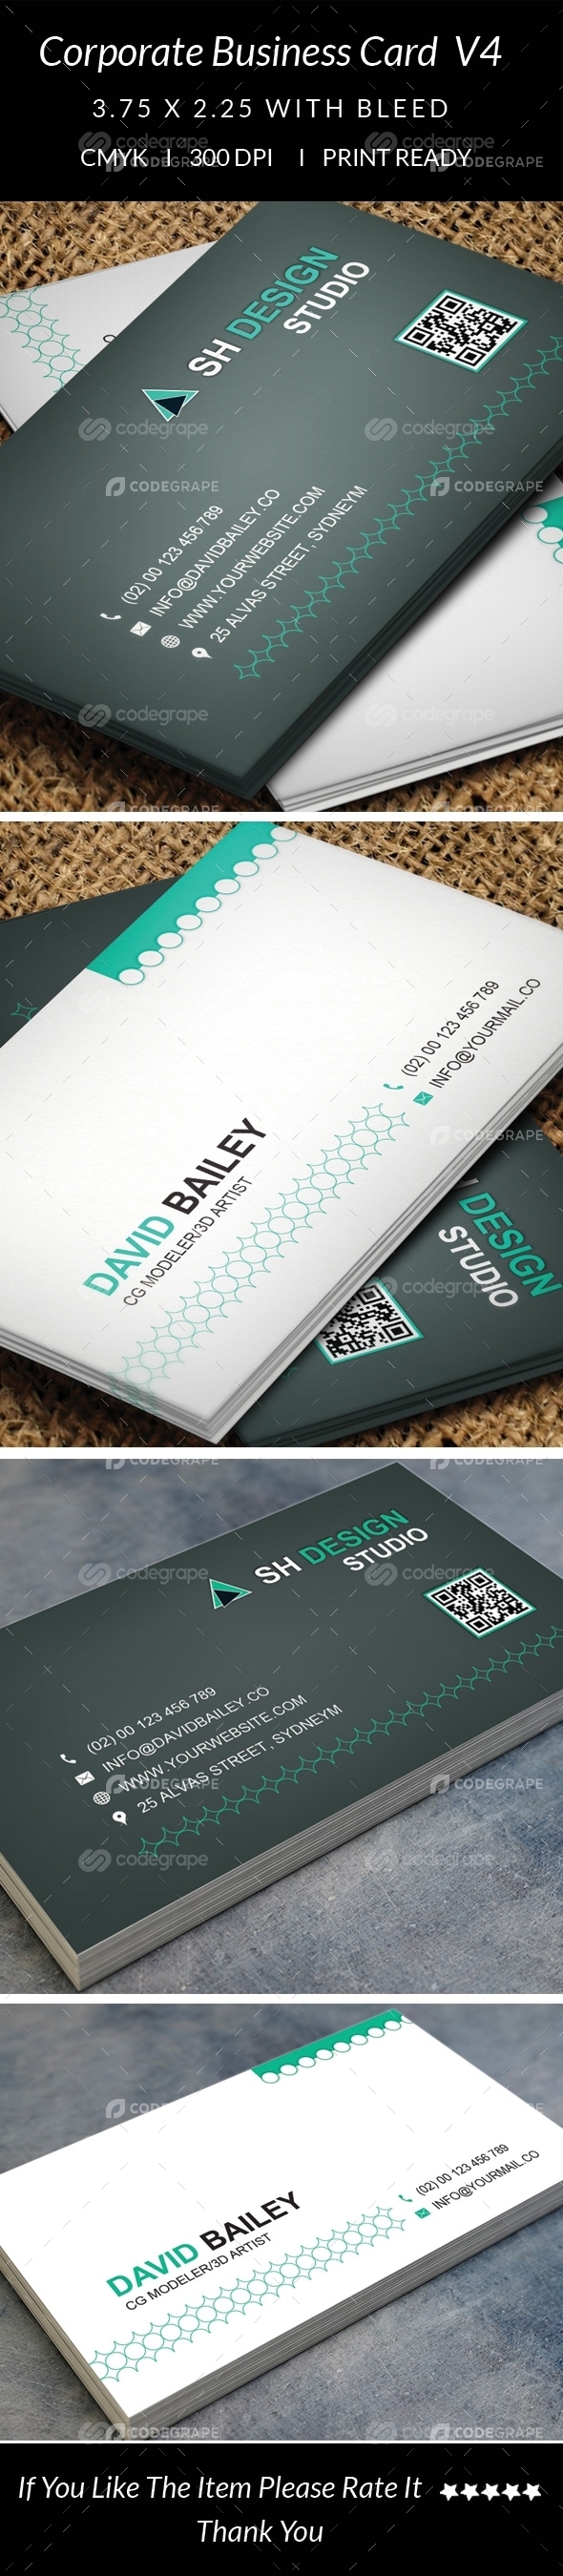 Corporate Business Card V4